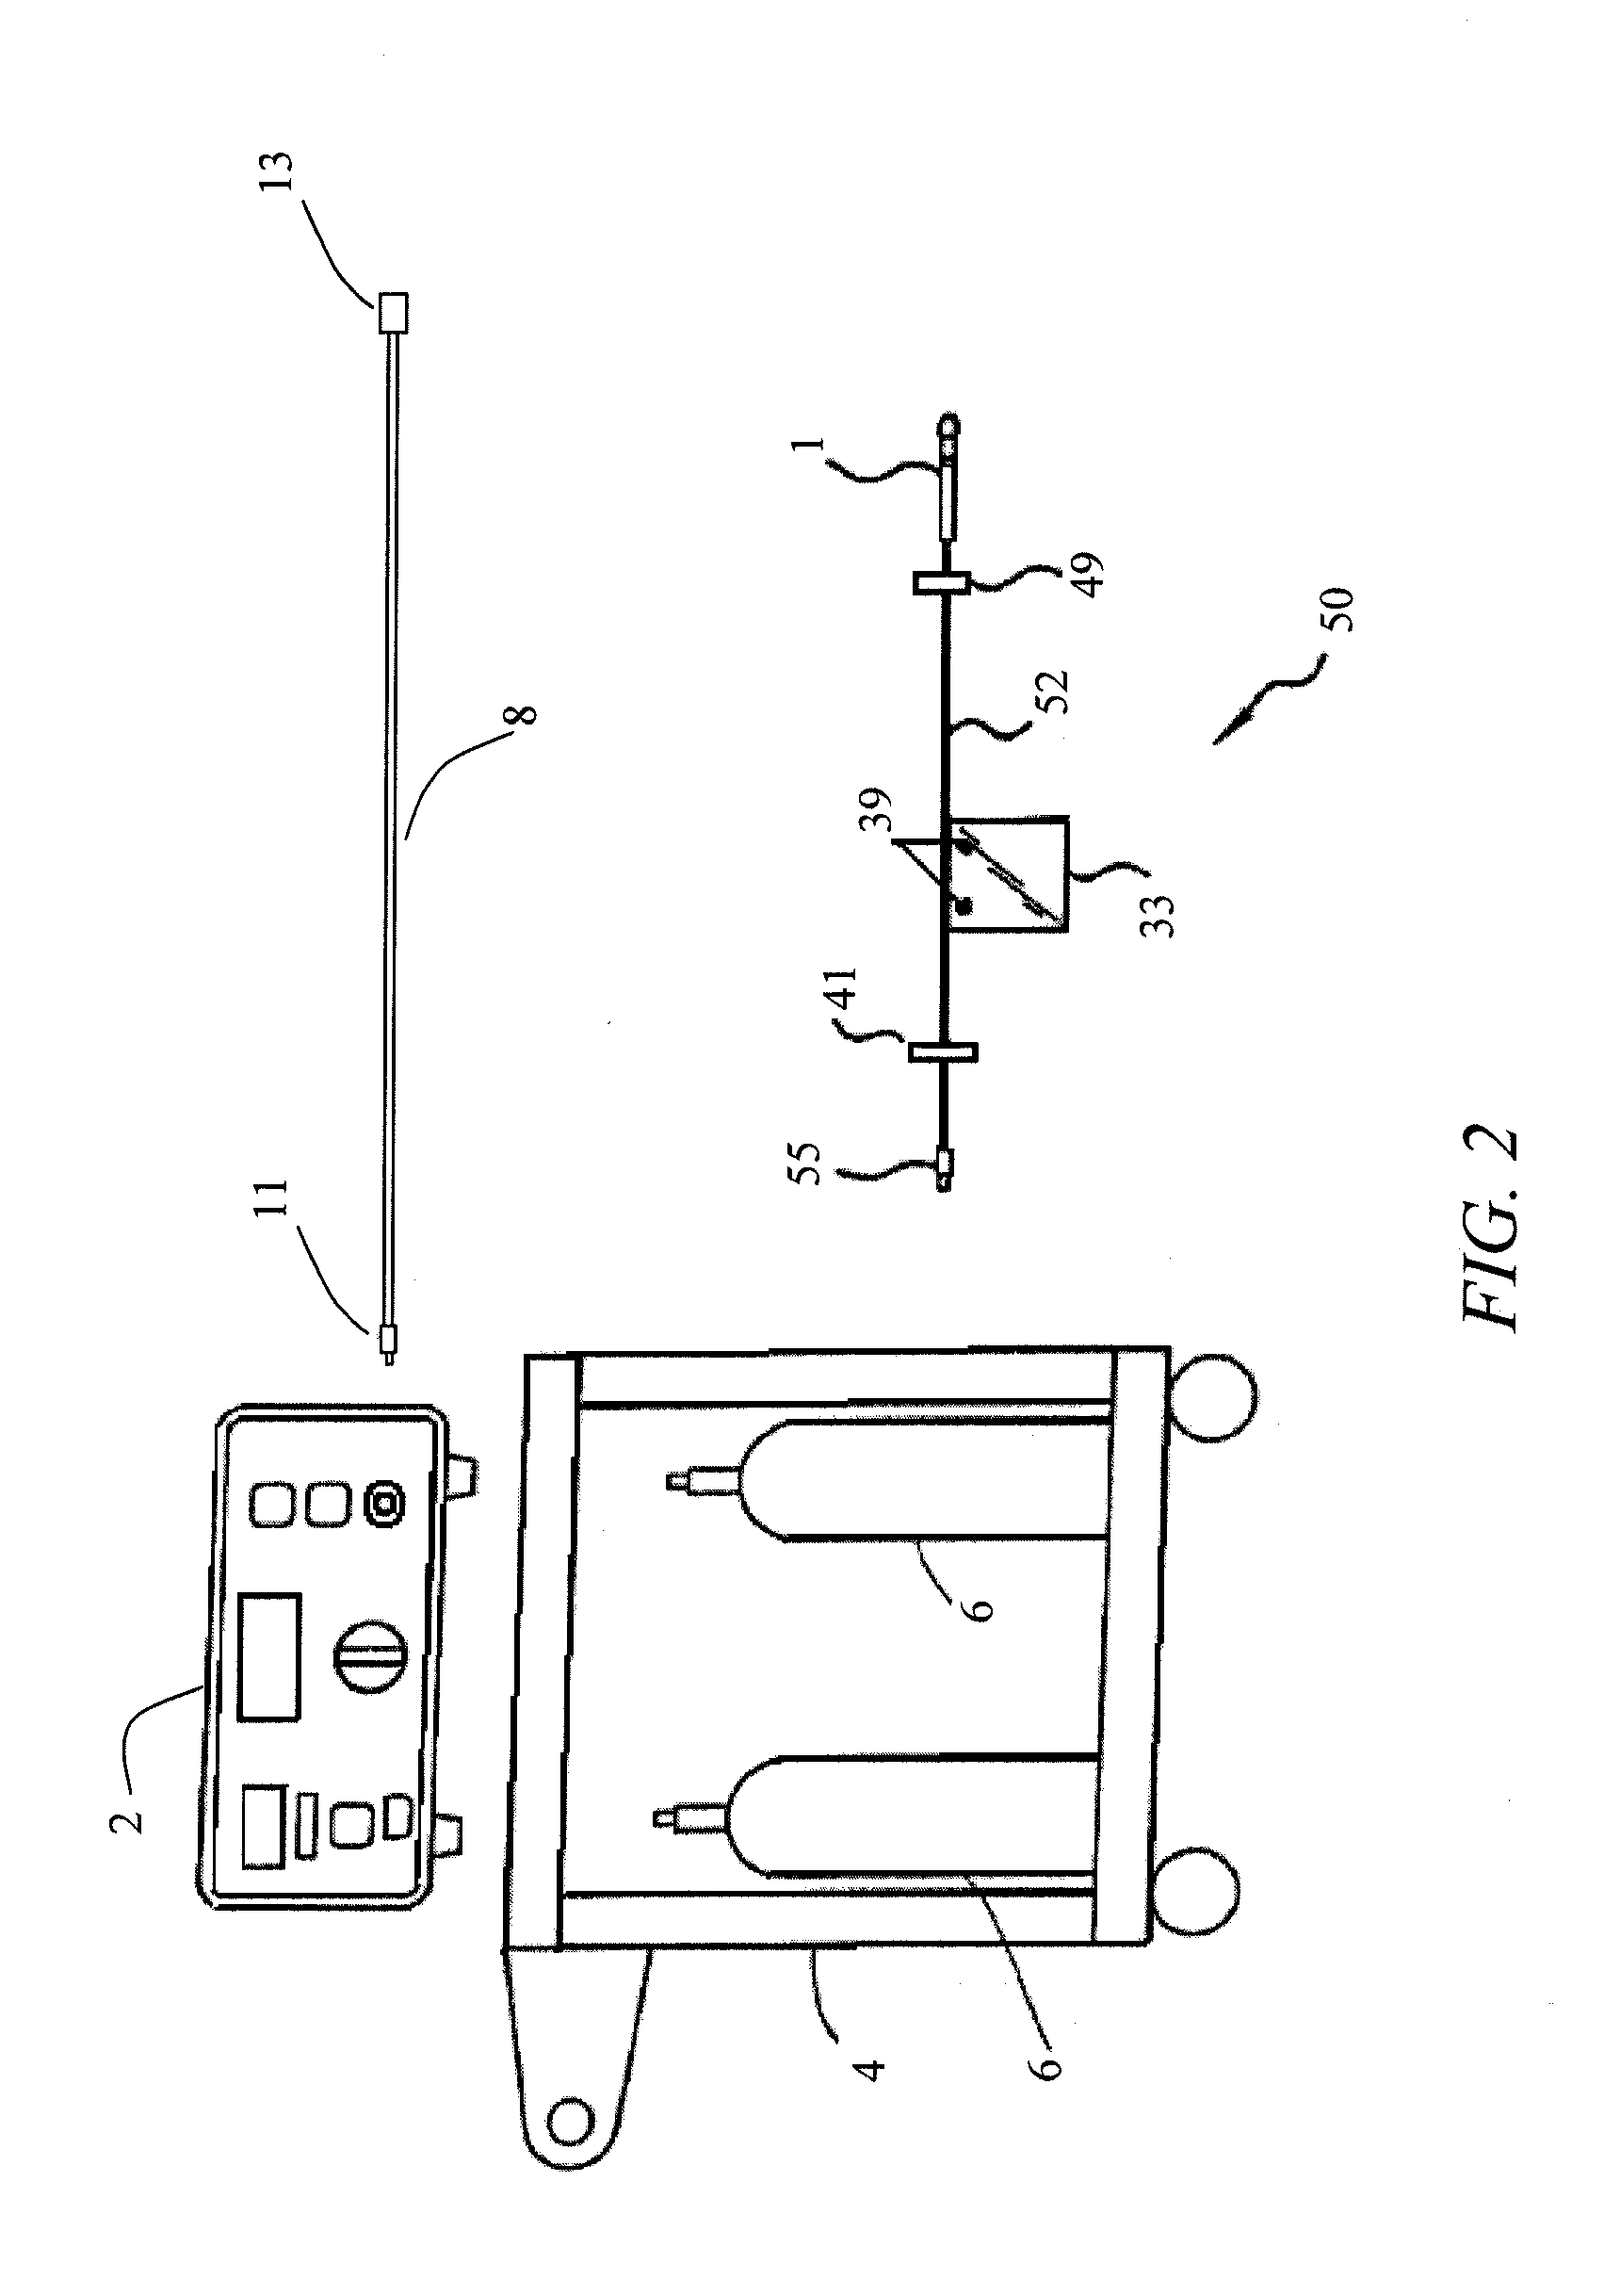 System, imaging suite, and method for using an electro-pneumatic insufflator for magnetic resonance imaging